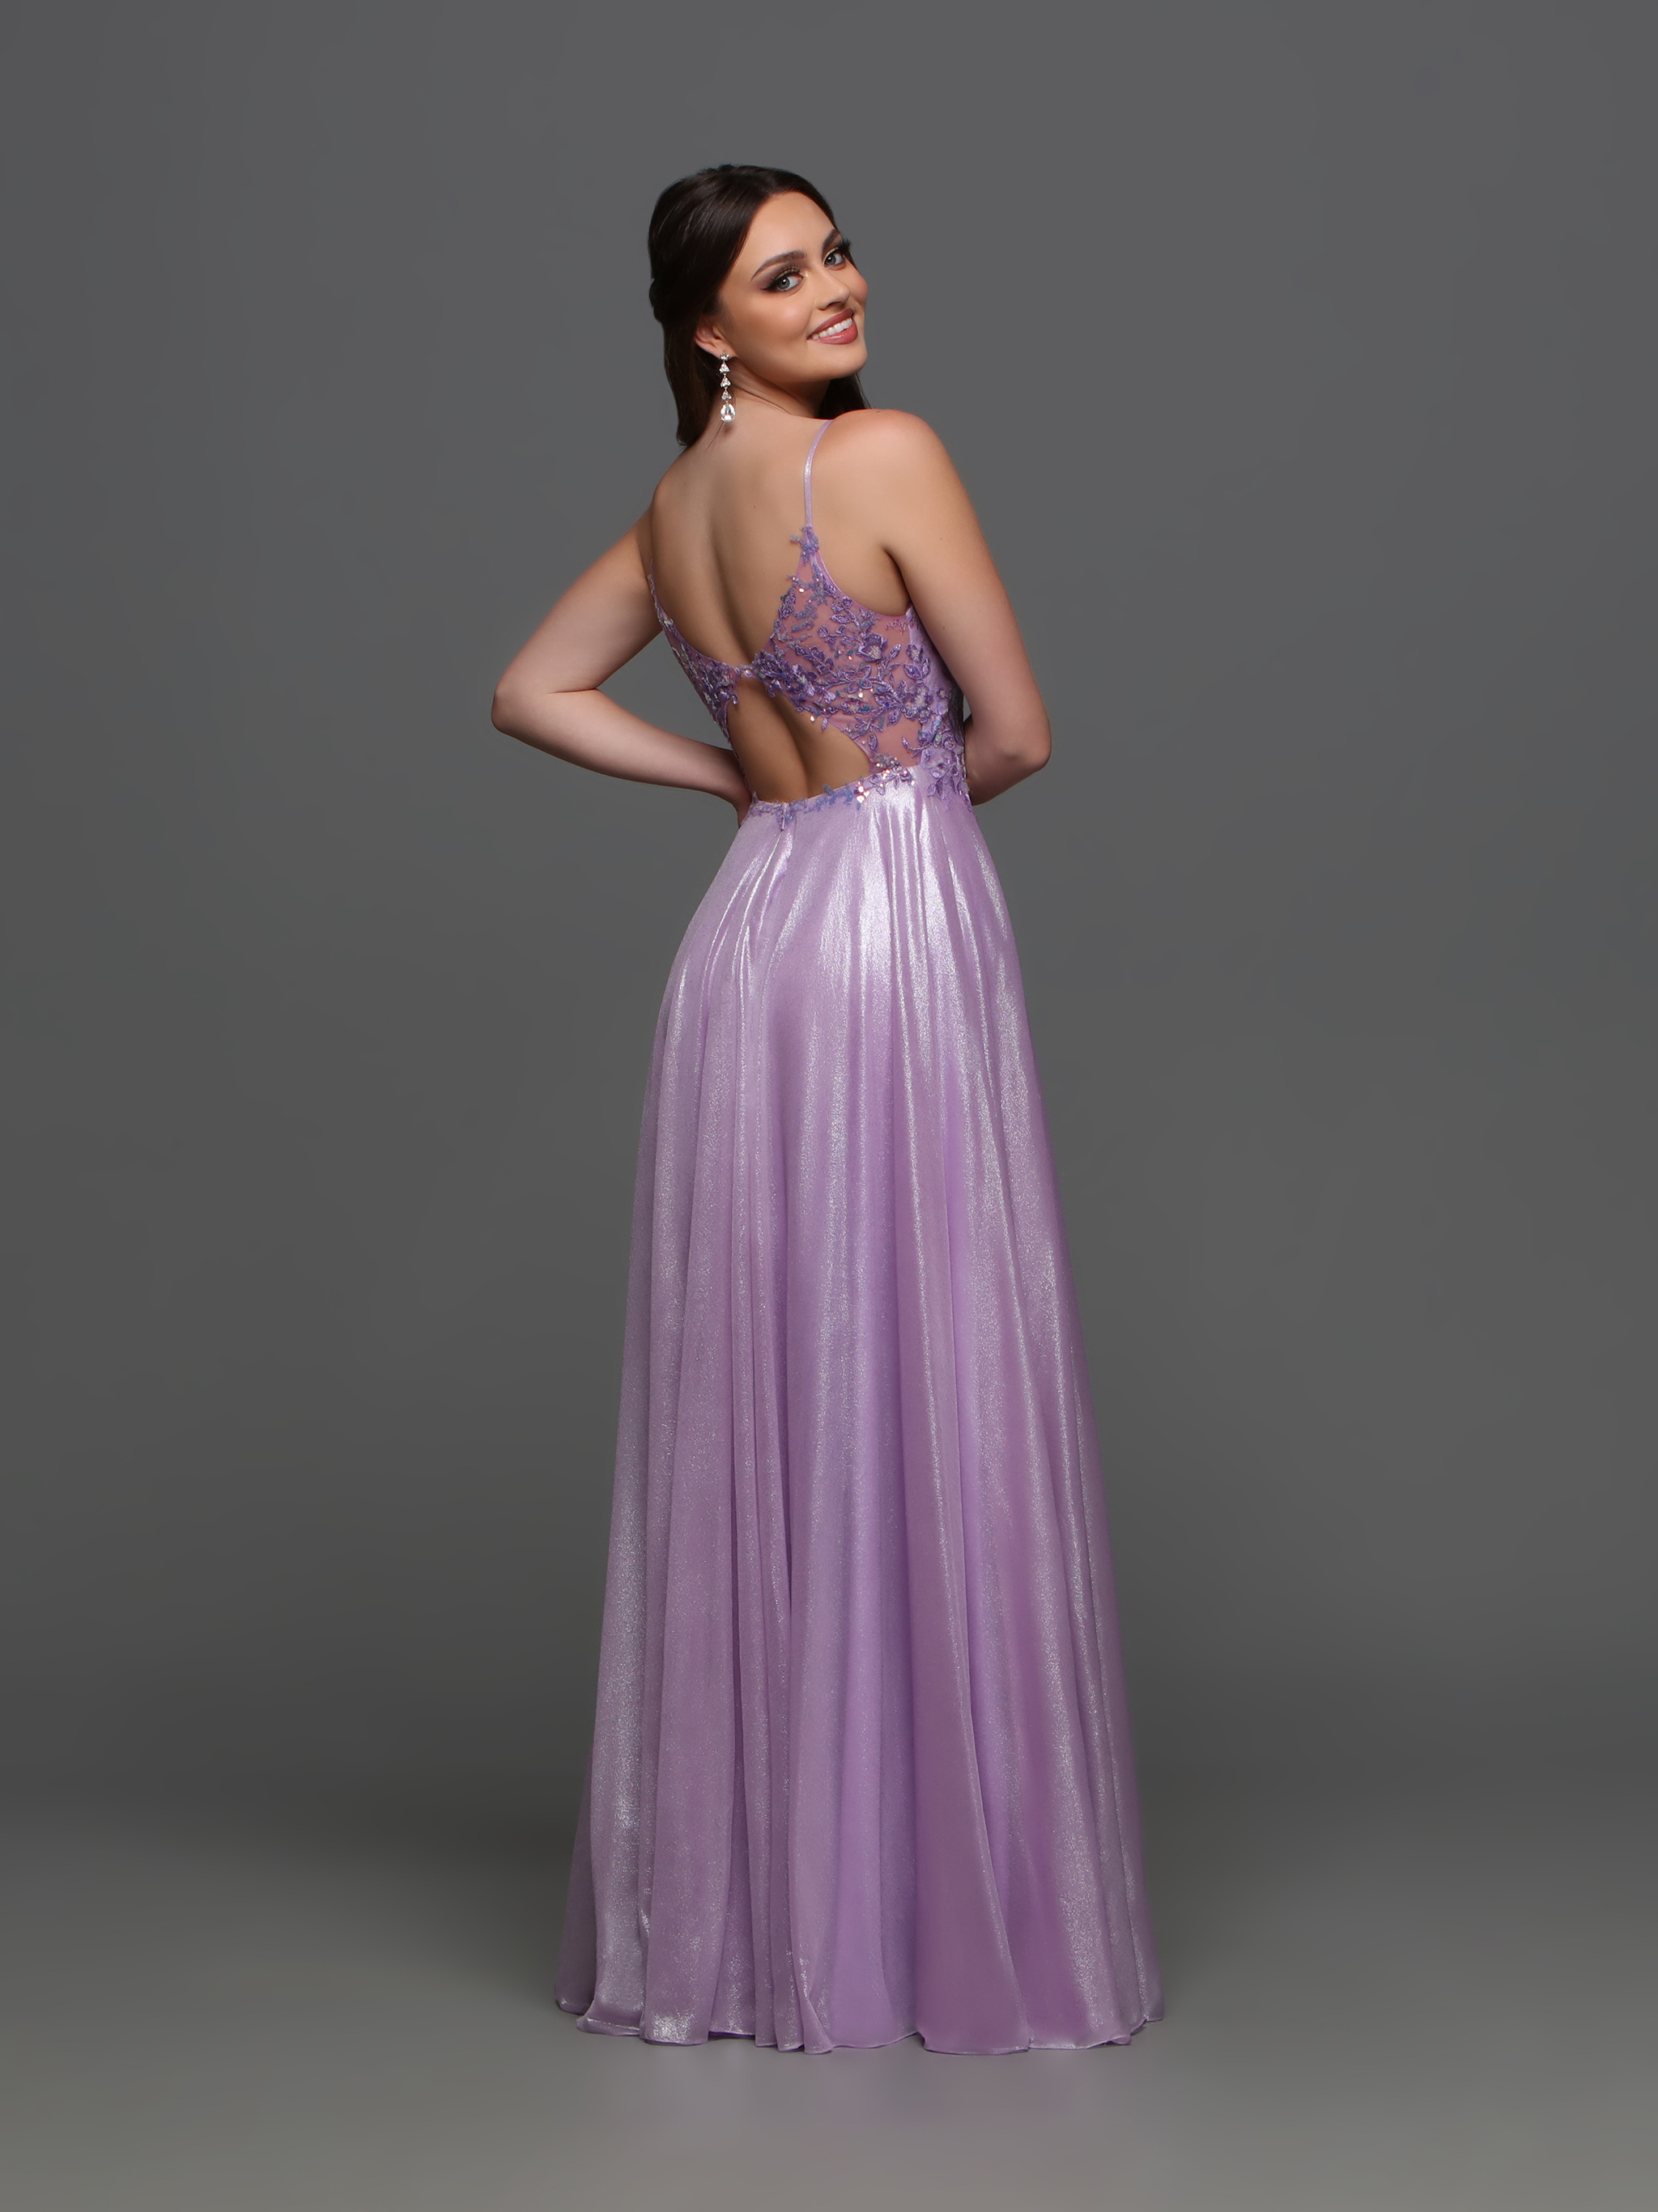 Image showing back view of style #72322